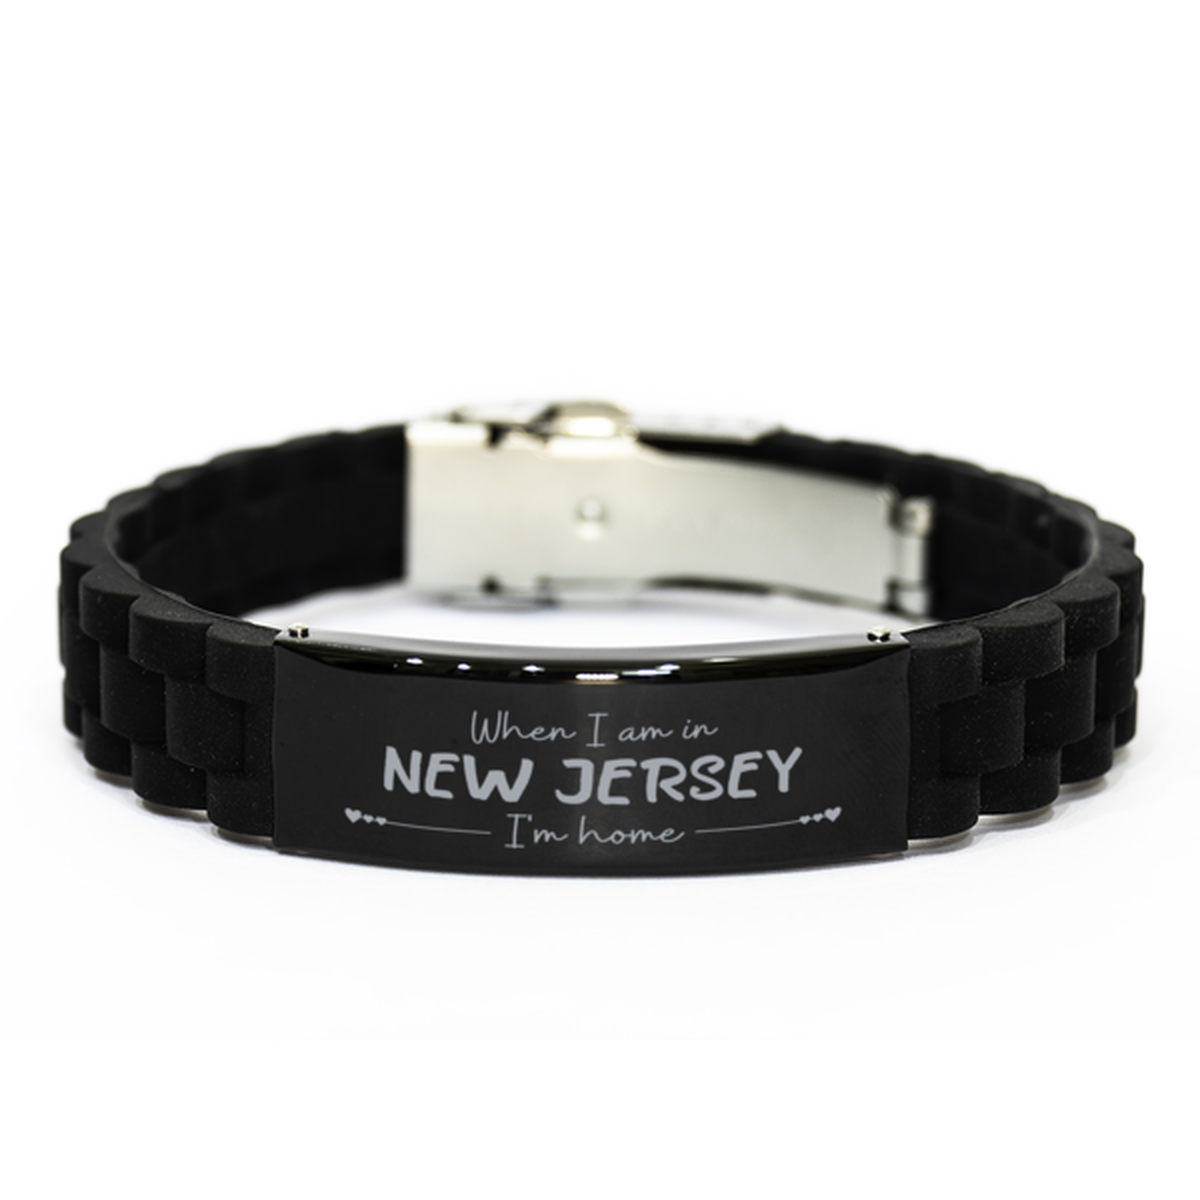 When I am in New Jersey I'm home Black Glidelock Clasp Bracelet, Cheap Gifts For New Jersey, State New Jersey Birthday Gifts for Friends Coworker